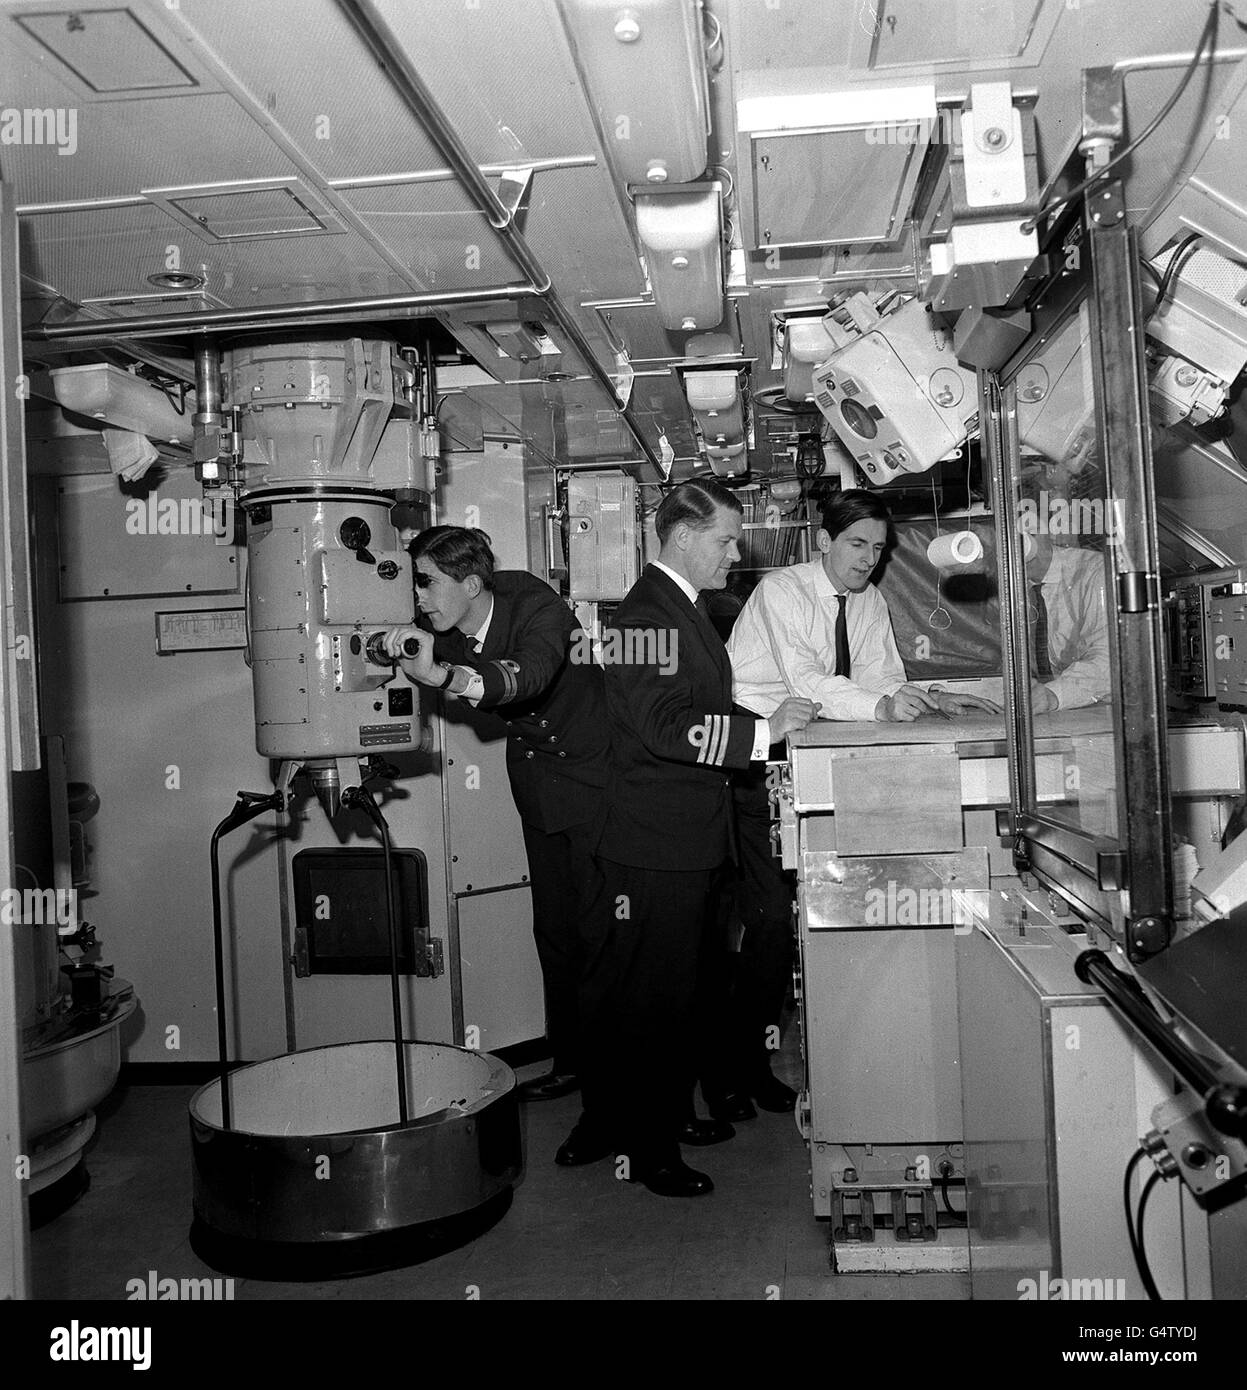 The Nuclear powered submarine Valiant at Portsmouth. Commander Herbert and Lieutenant P.Q.Stevens are studying the navigation chart. On left Lieutenant C.W.Hunter is on the periscope. The submarine was visiting Portsmouth after four months of trials. Stock Photo